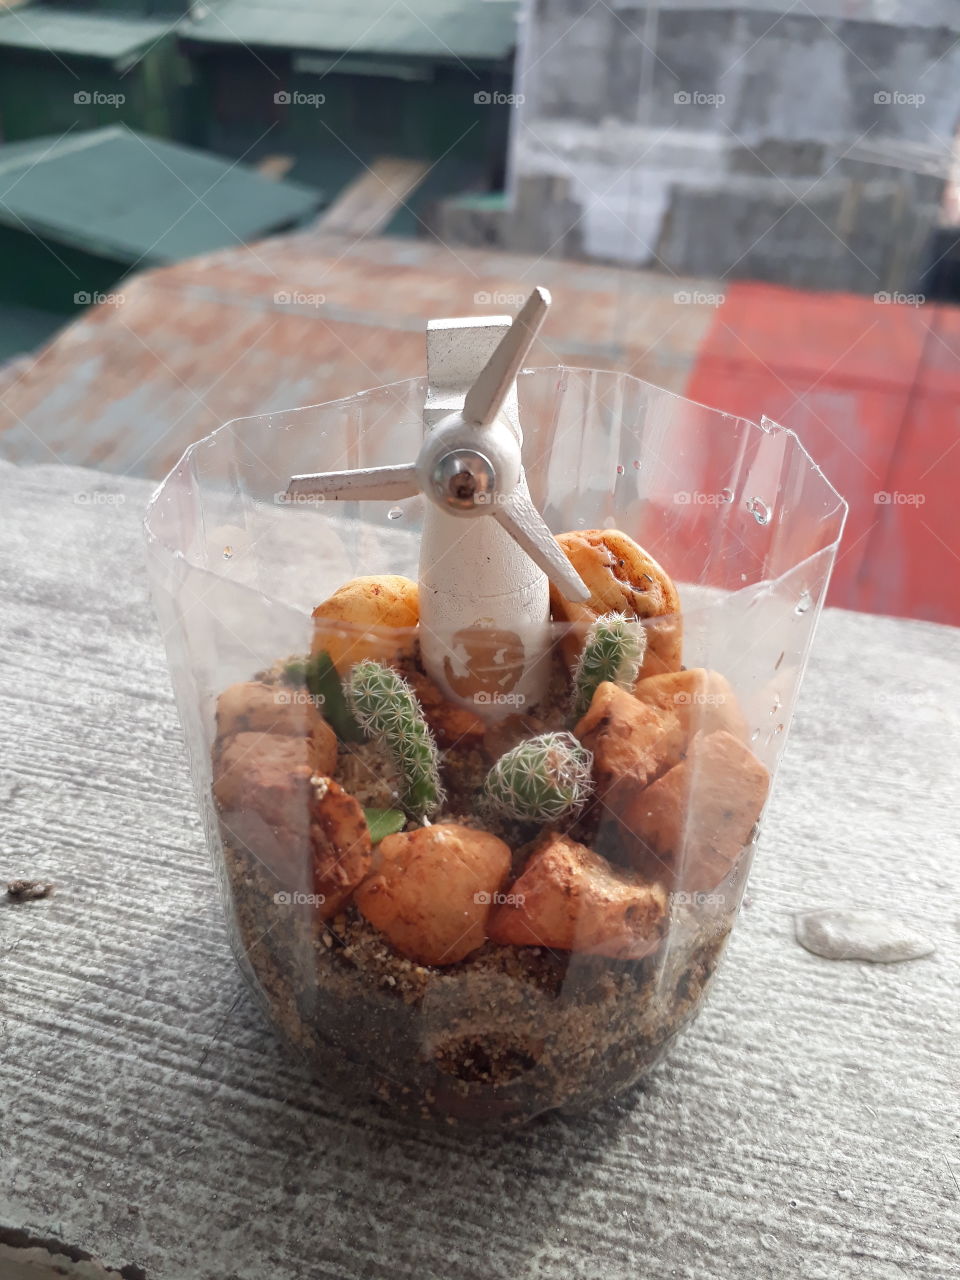 To love nature is to recycle!
#recycle #nature #cactus #succulent #stones #sand #plasticbottle #windmill #miniature #minigarden #succulent #beginner